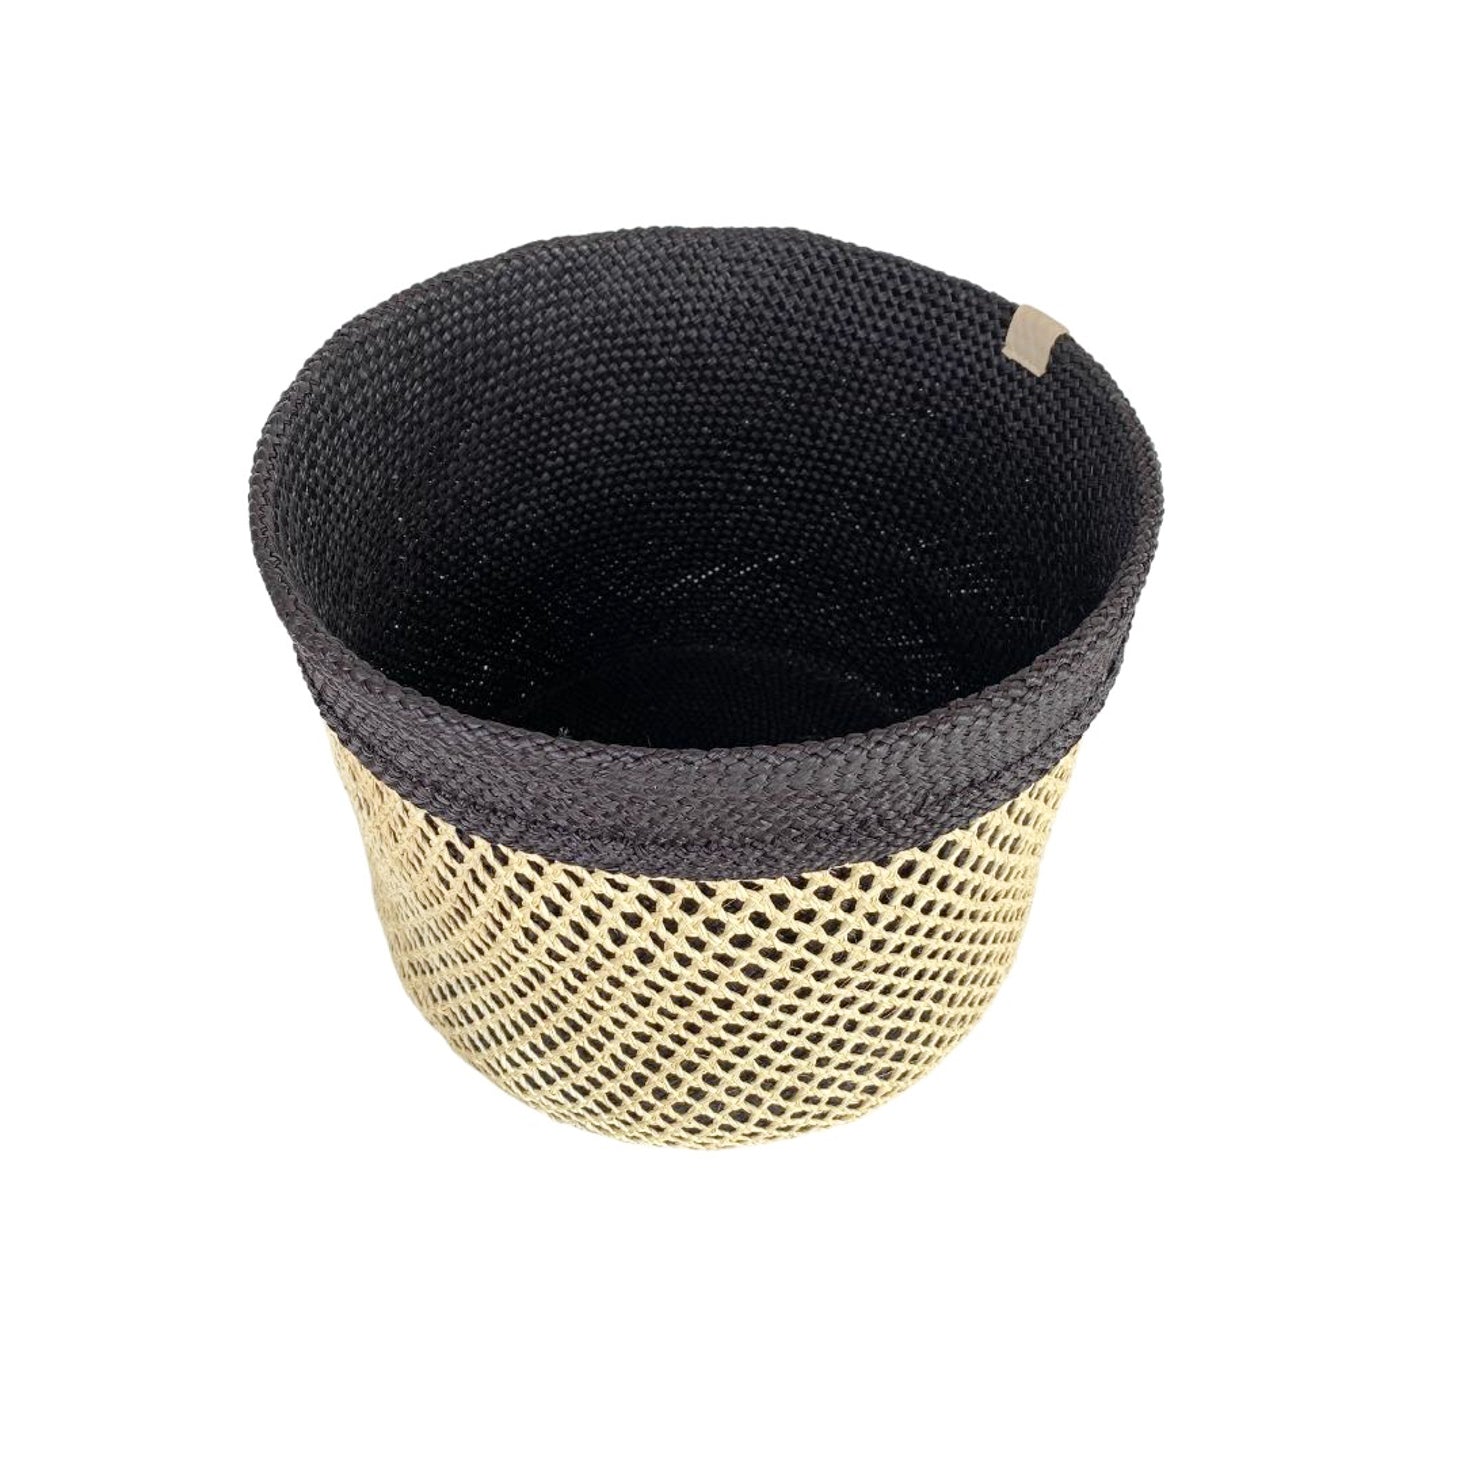 Two-in-one Woven Basket: Black and Natural Mesh